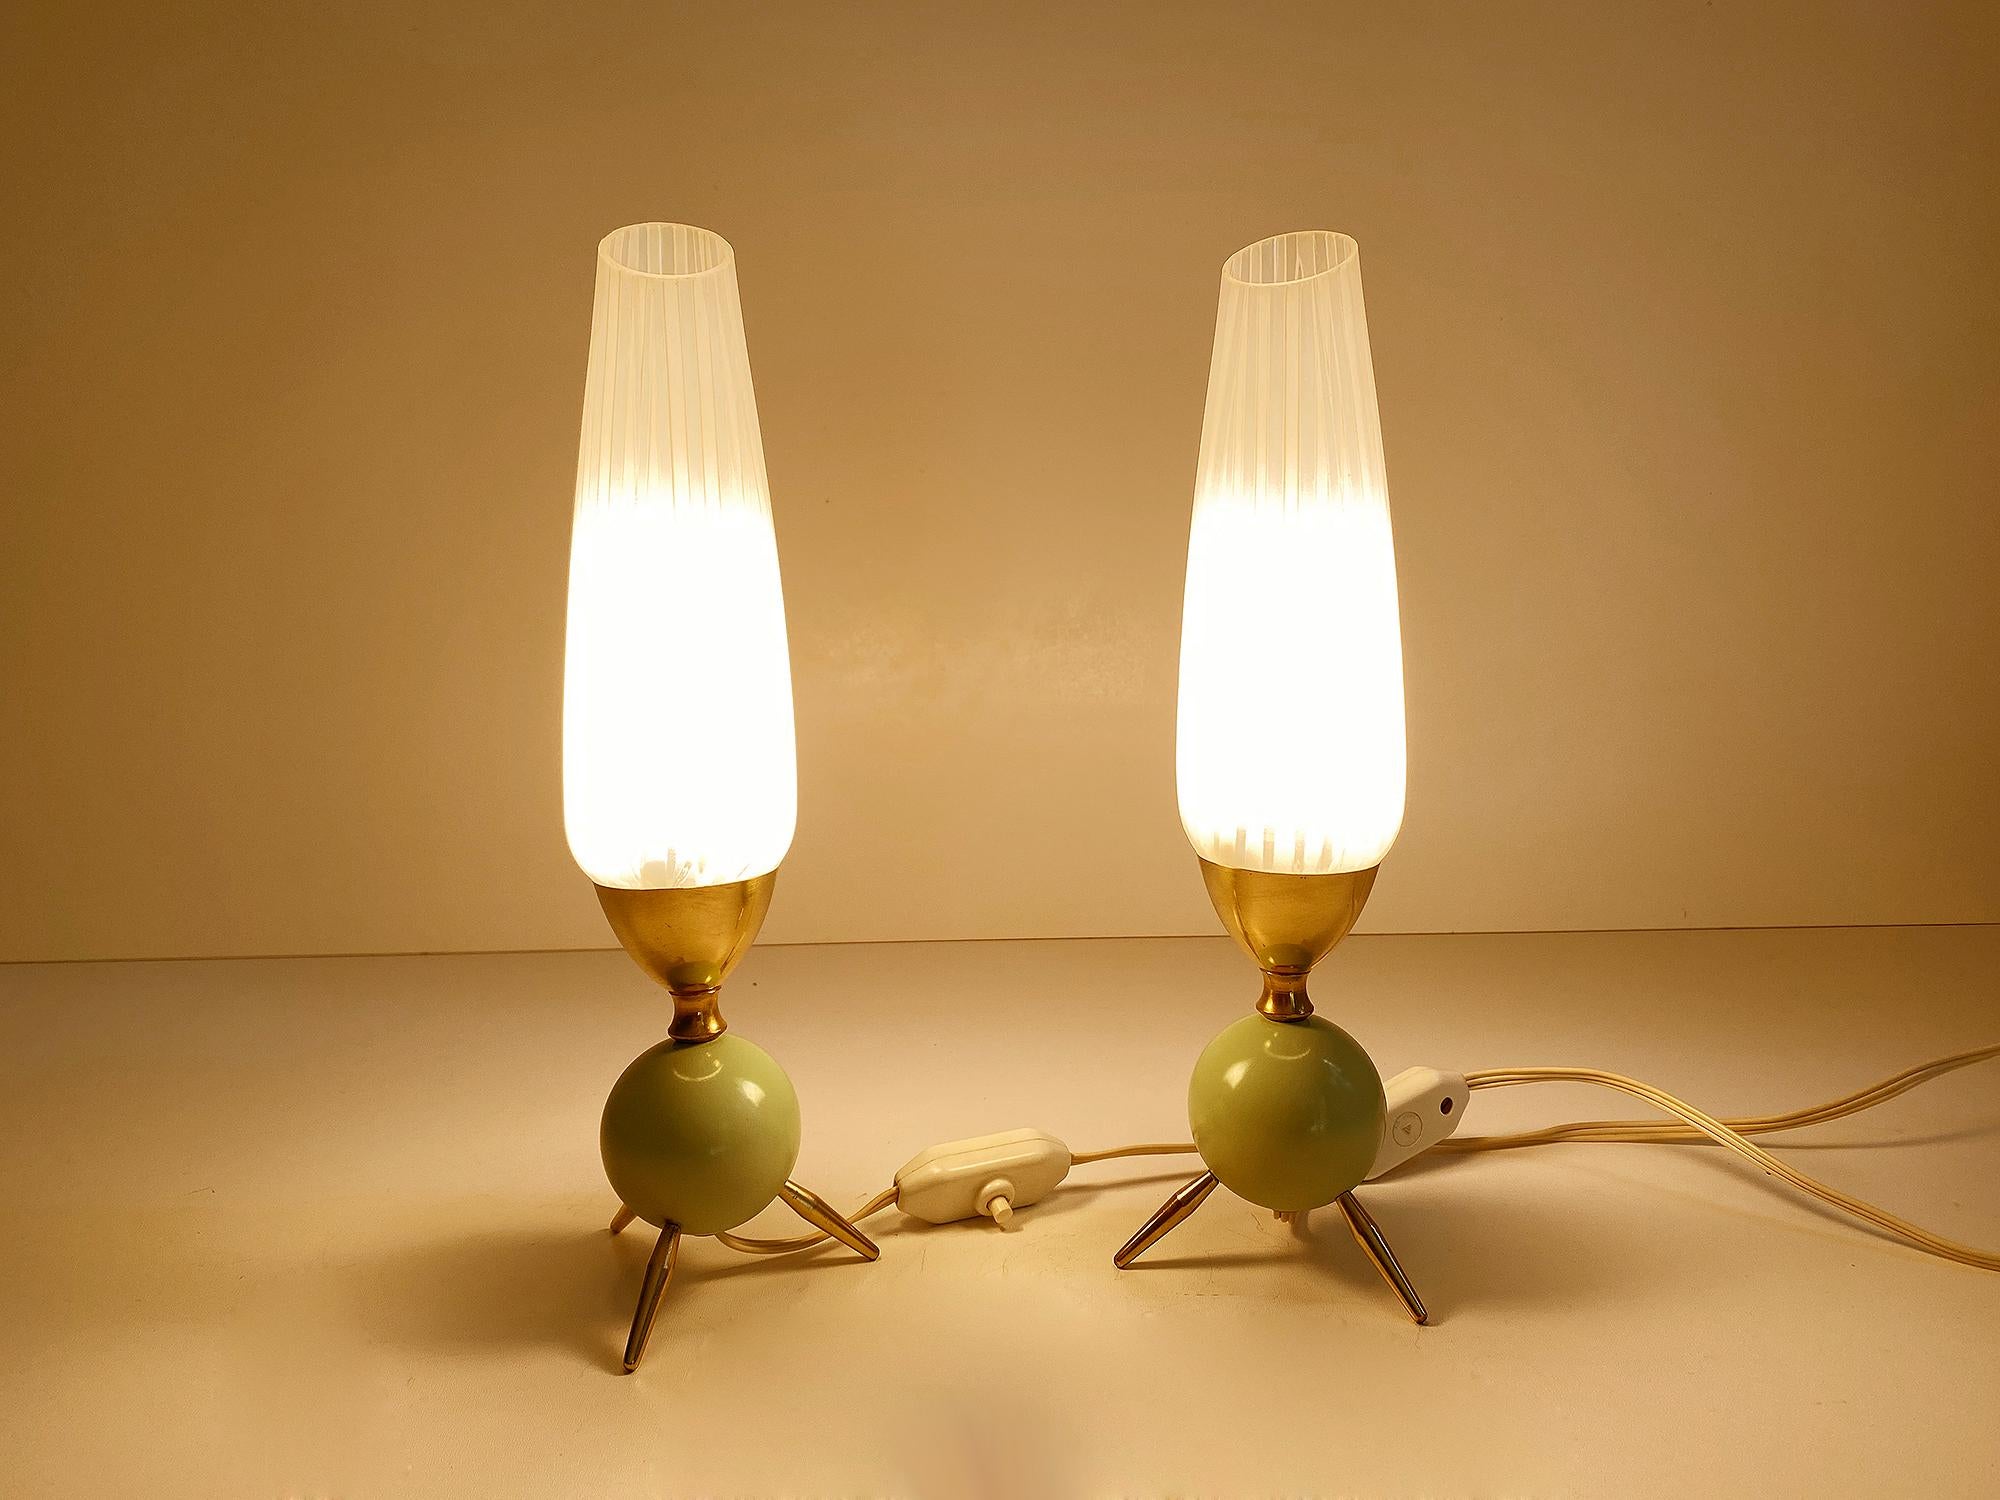 Pair of  1950s table lamps, unusual design with agreen enameled sphere base on brass tripod feet, chamfered. bulbous opaline glass shades with a pinstripe pattern. - fully rewired - The lamps have been tested with US American light bulbs under 120v